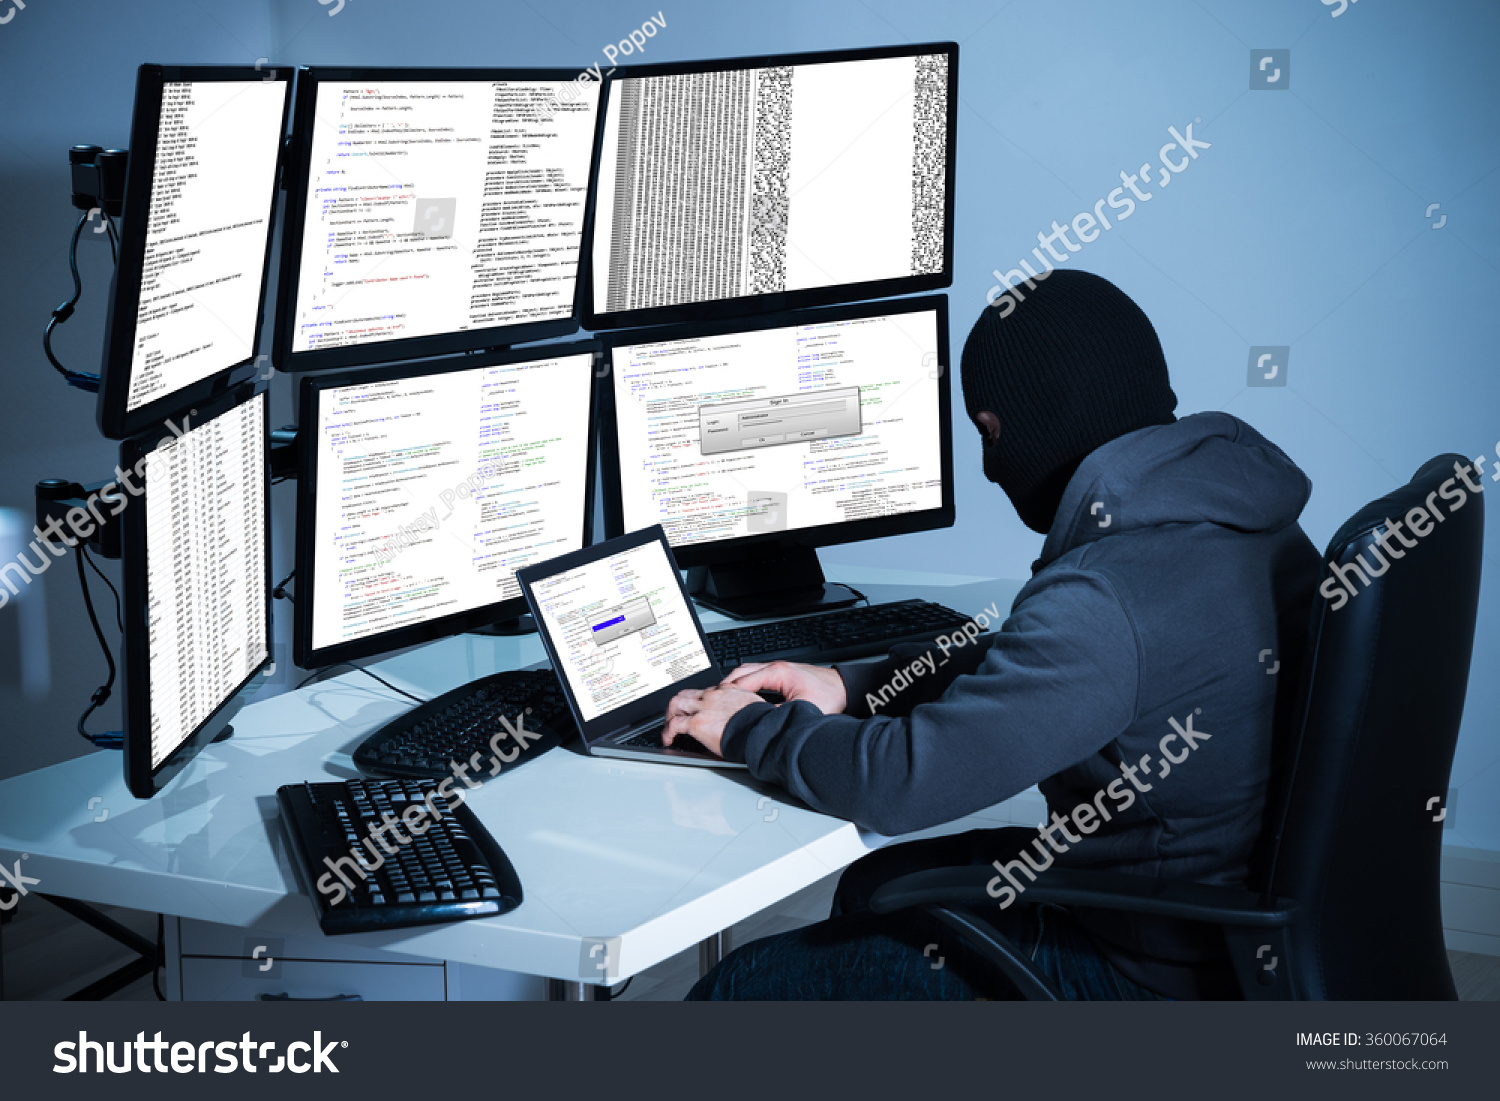 Male hacker using laptop against multiple monitors at desk in office #360067064